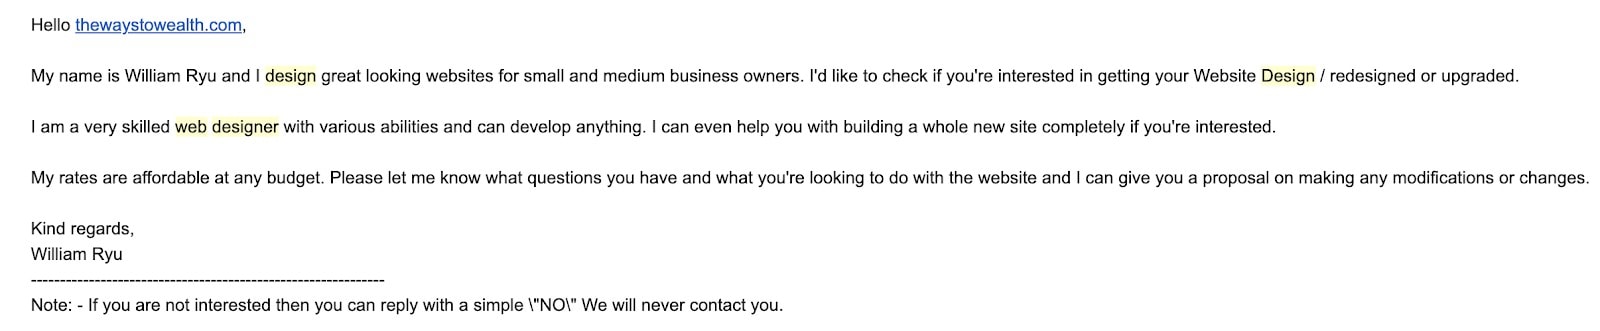 Example of a bad email proposal